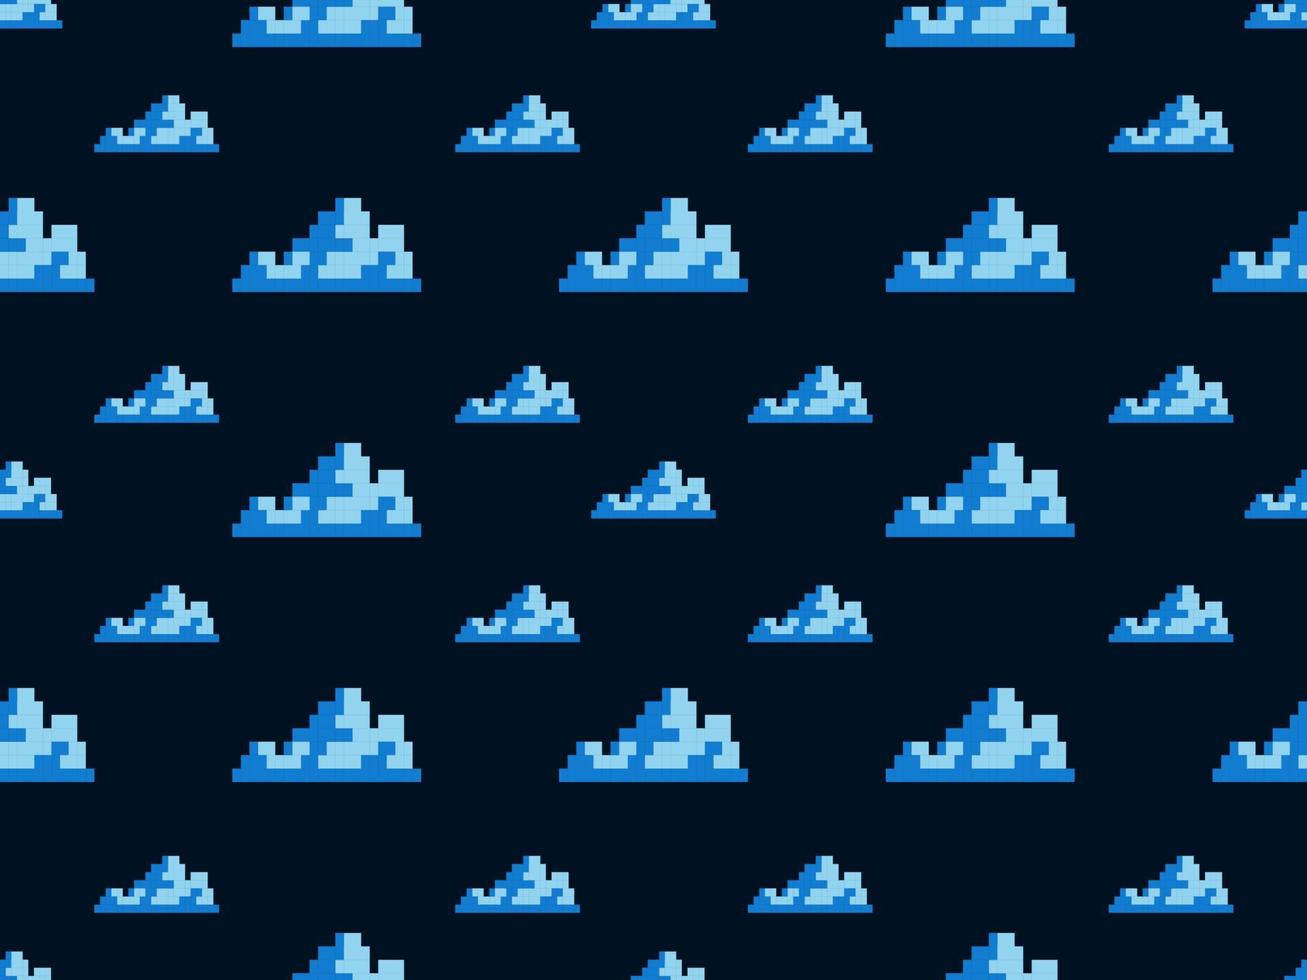 Cloud cartoon character seamless pattern on blue background.Pixel style vector